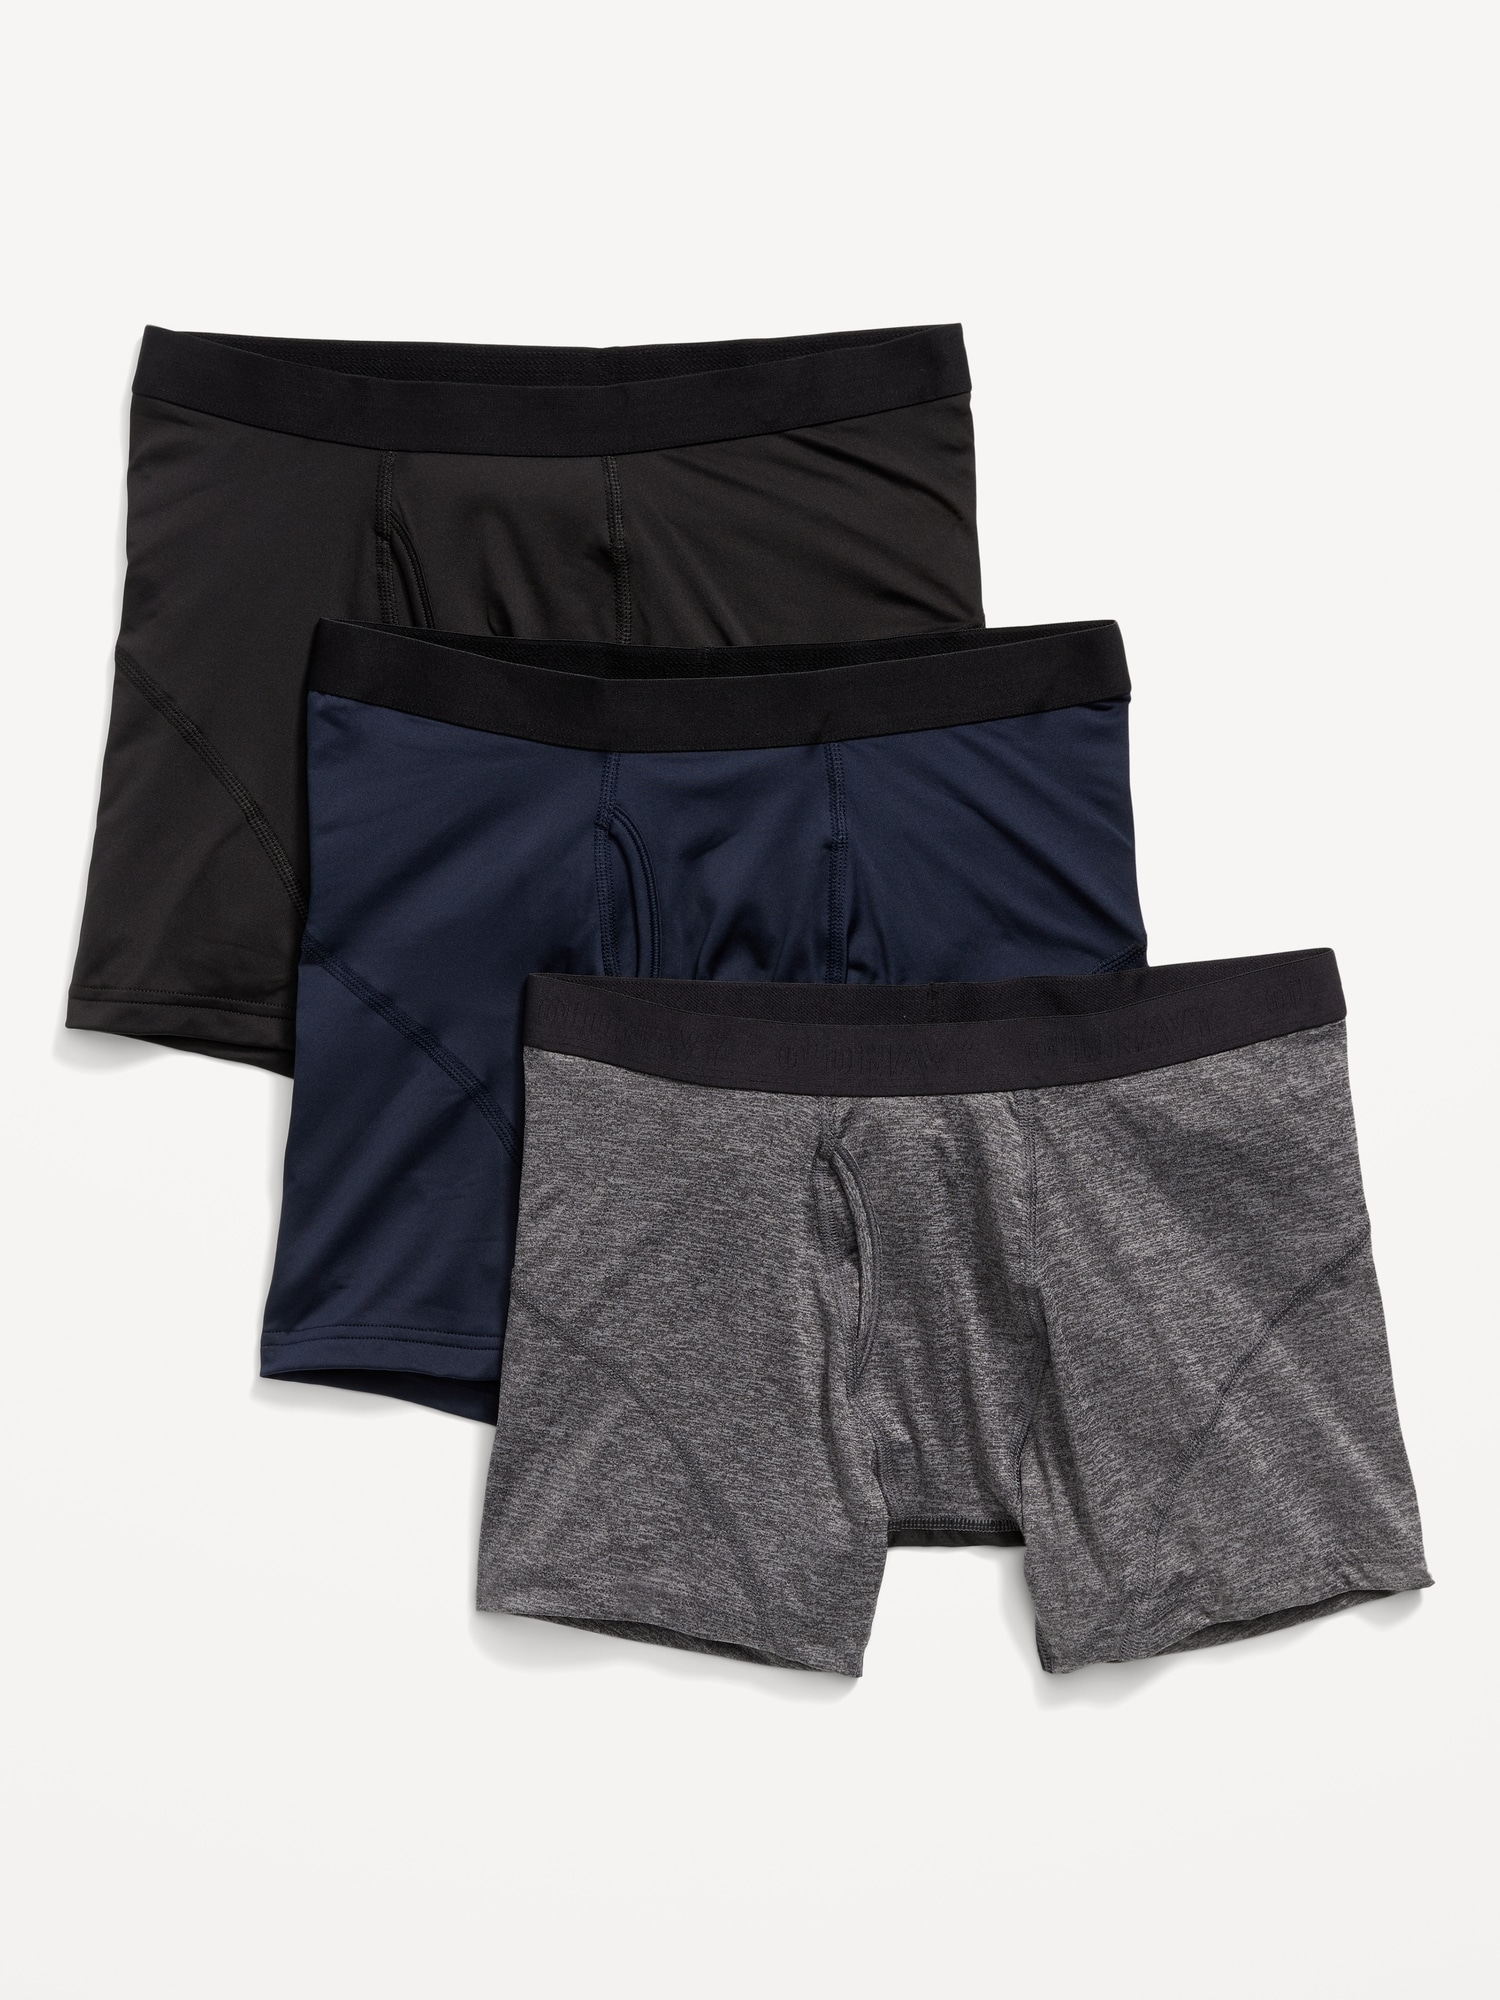 Old Navy - Go-Dry Cool Performance Boxer-Briefs Underwear 3-Pack for ...